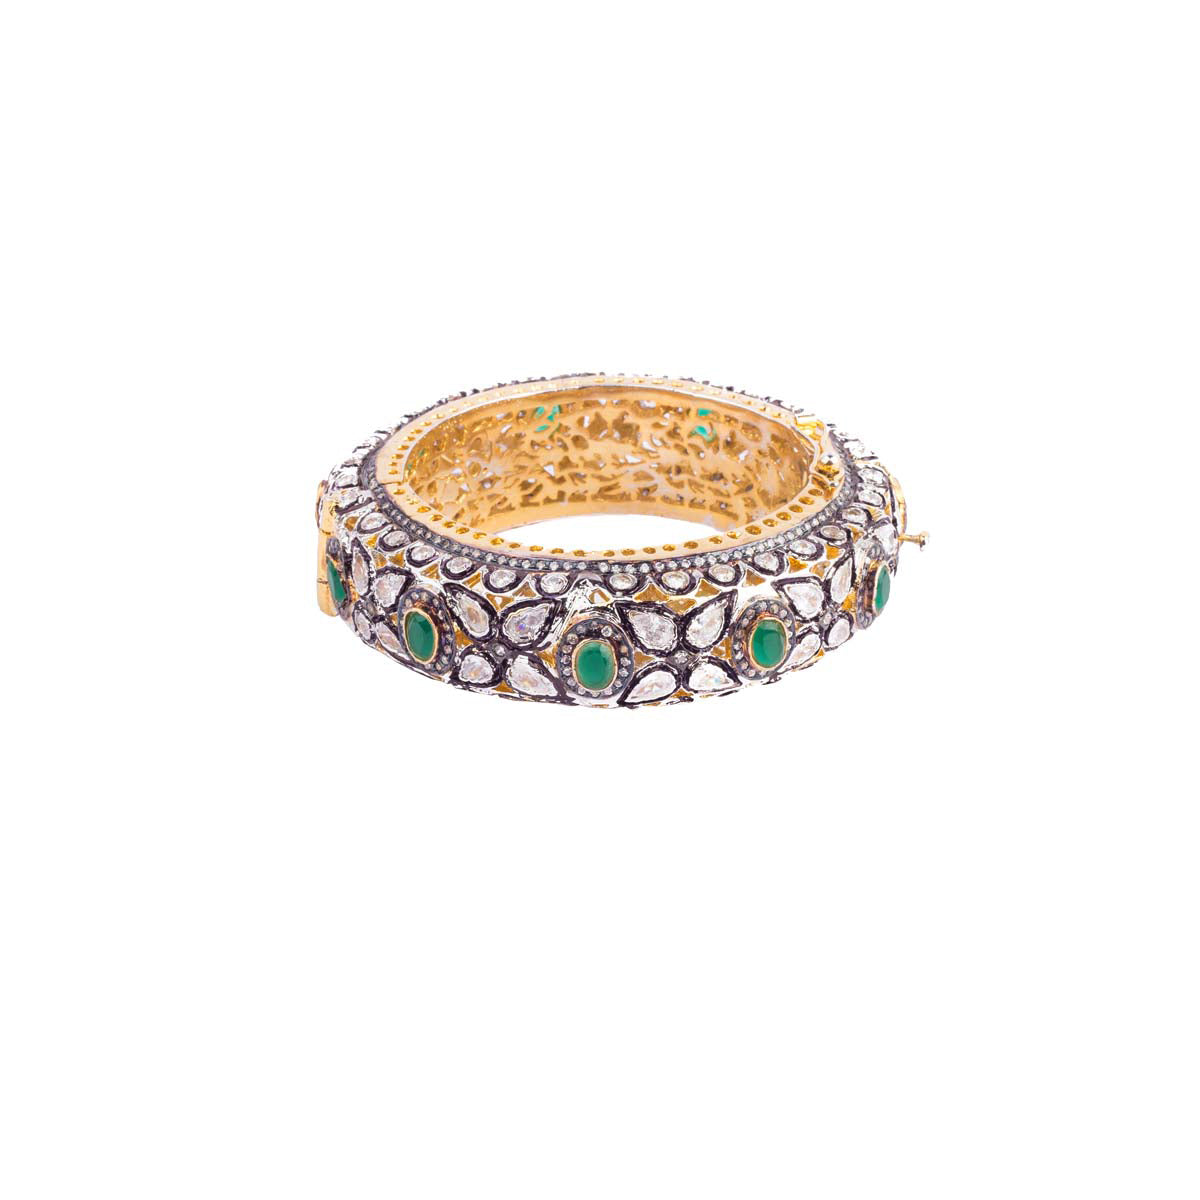 We're giving you some serious arm candy! This statement matte gold-finish bangle with rose cut crystals and green onyx stones is set in the mixed metal alloy.